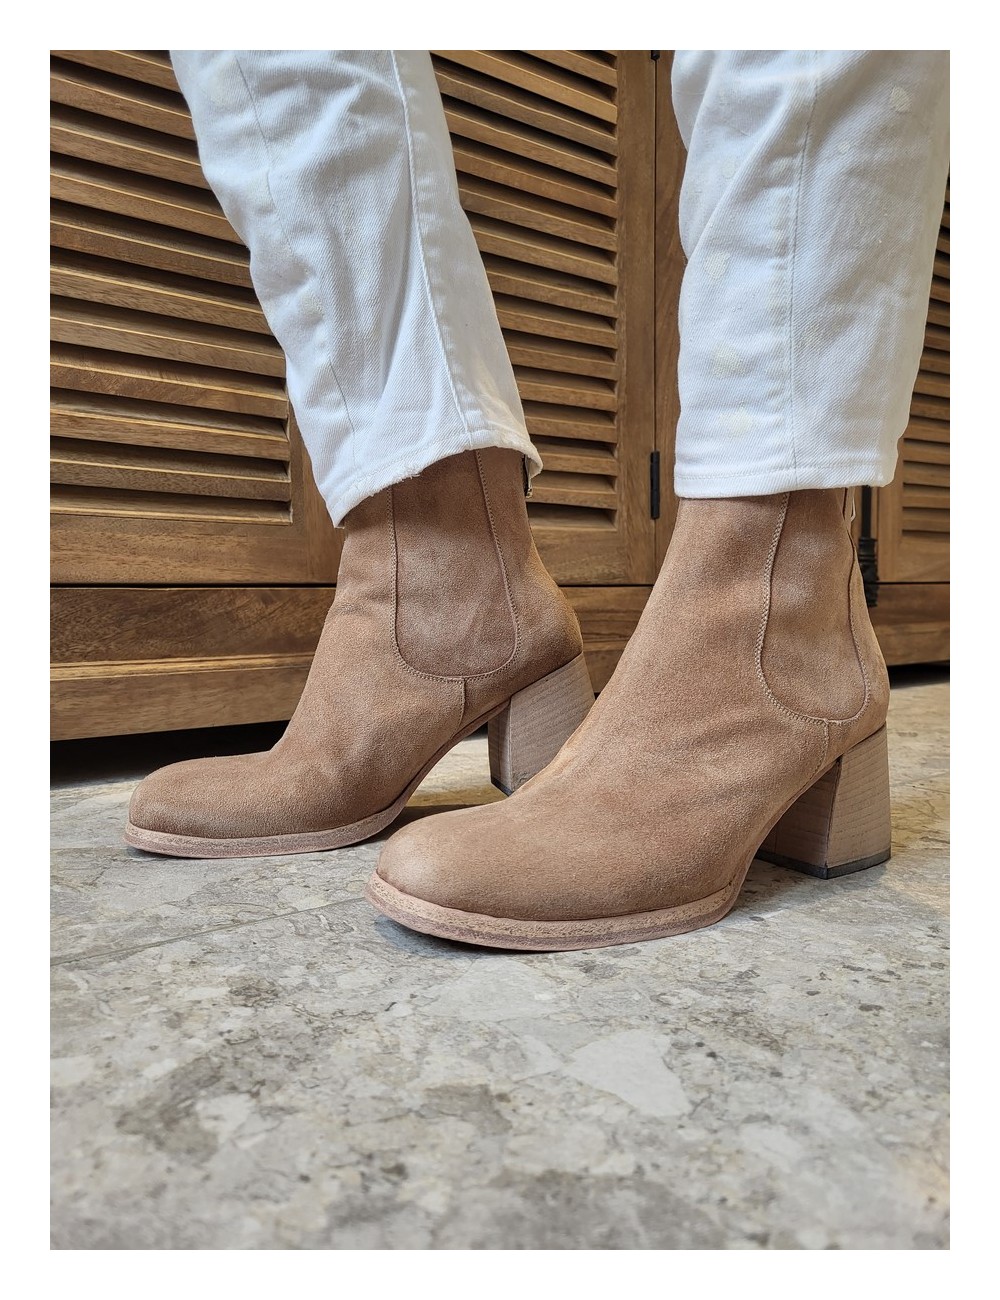 Women's suede boots with...